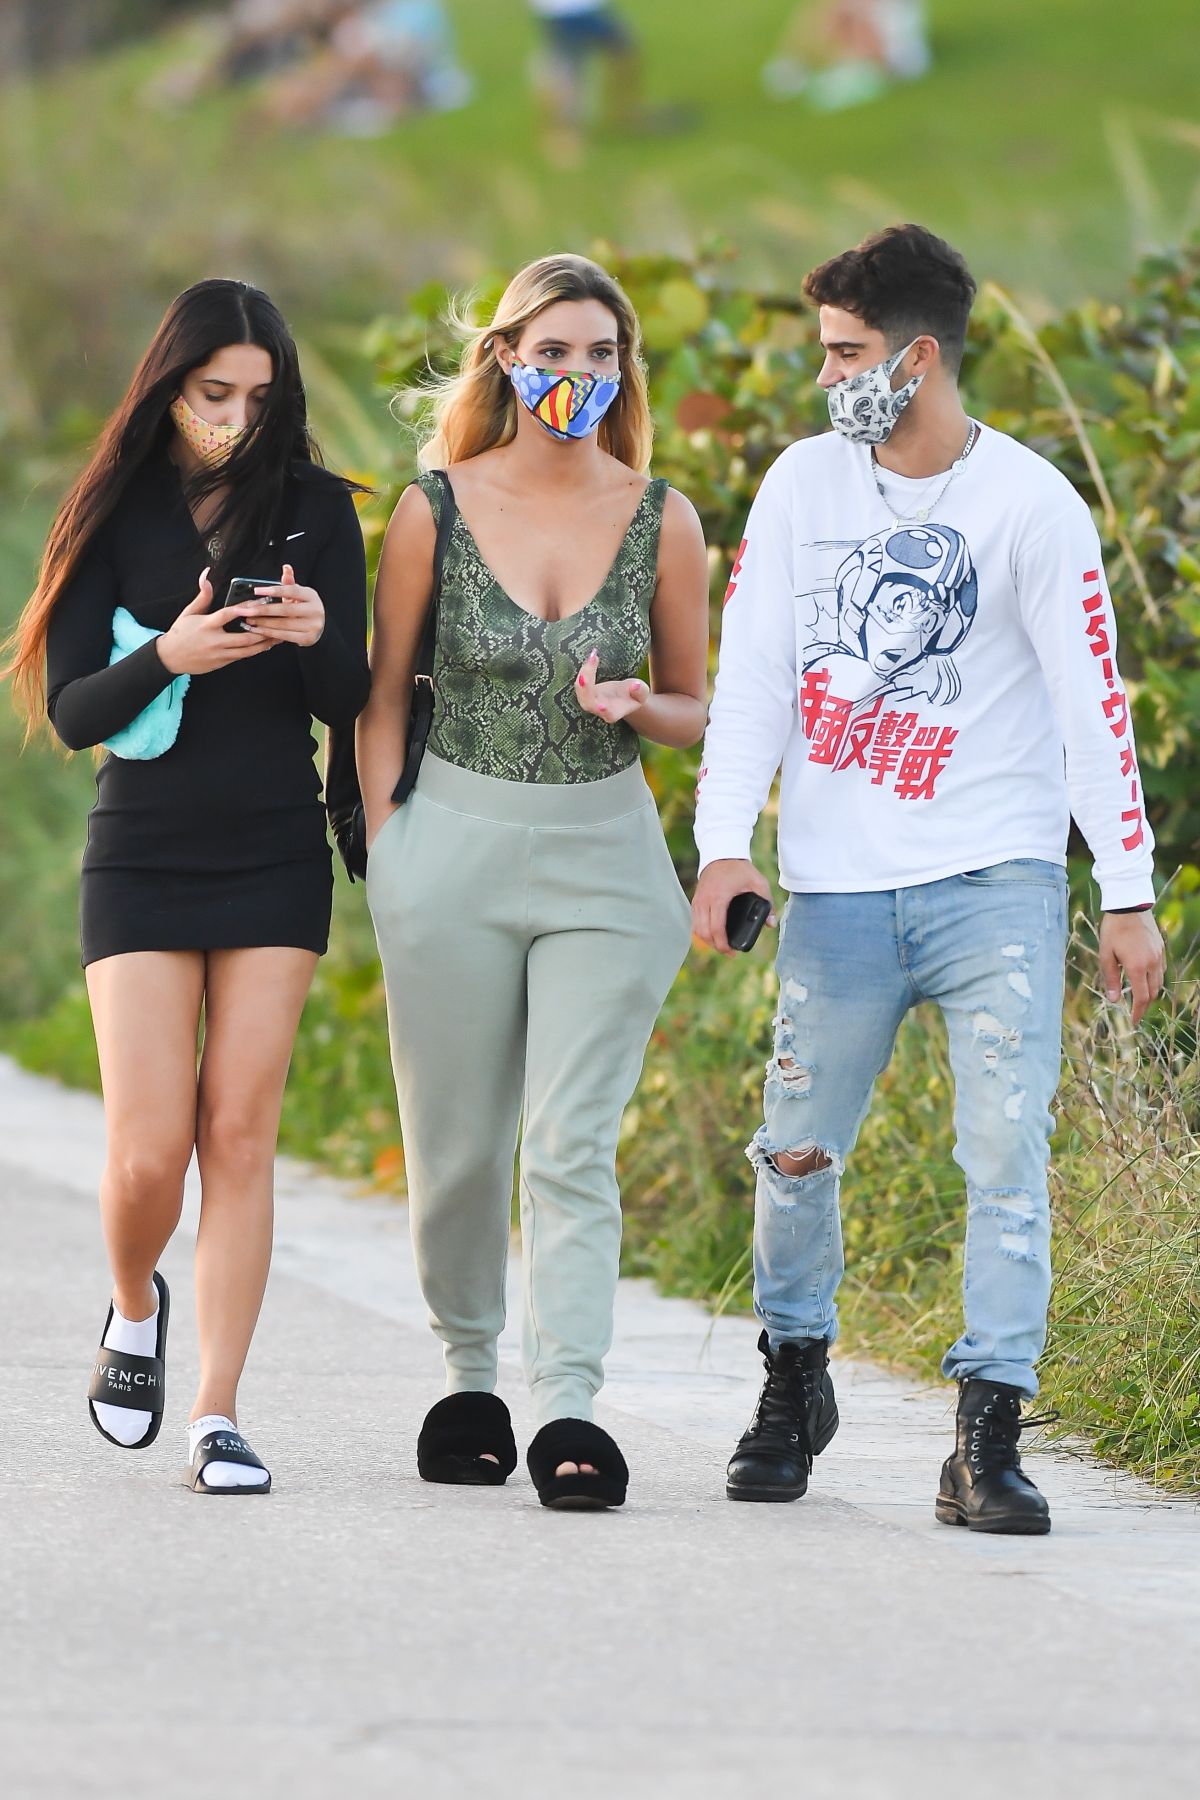 LELE PONS and MARIAH ANGELIQ Out in Miami Beach 11/27/2020.